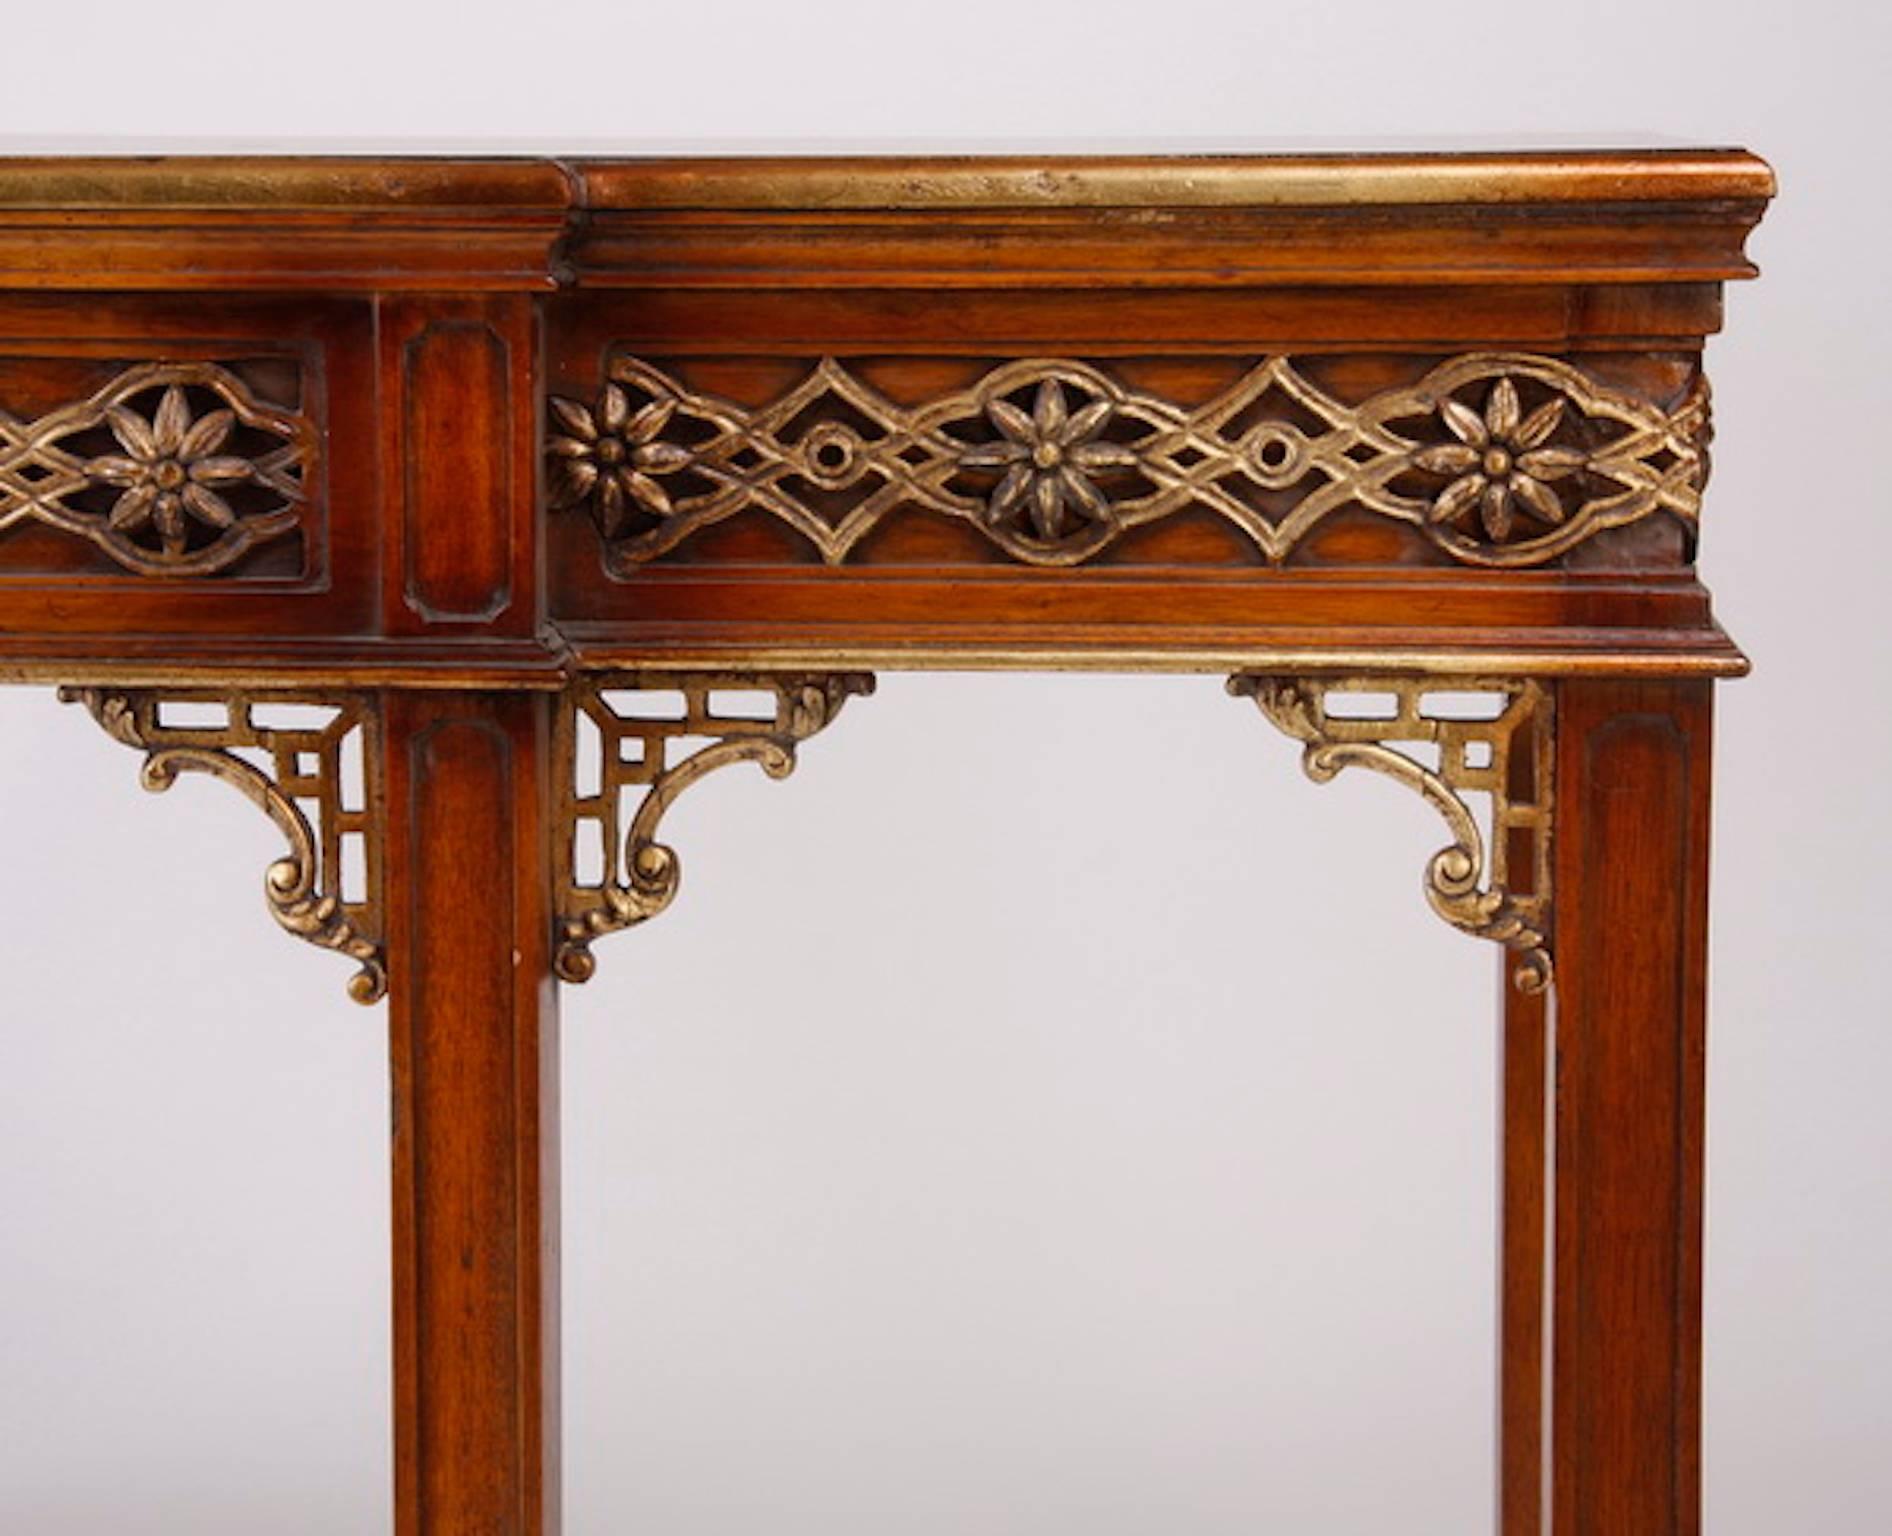 Carved mahogany console table, the parquetry inlaid top over a carved and parcel-gilt apron raised on Marlborough legs with pierce carved giltwood brackets. Measures: 36.5" H x 71.5" L x 24" D.